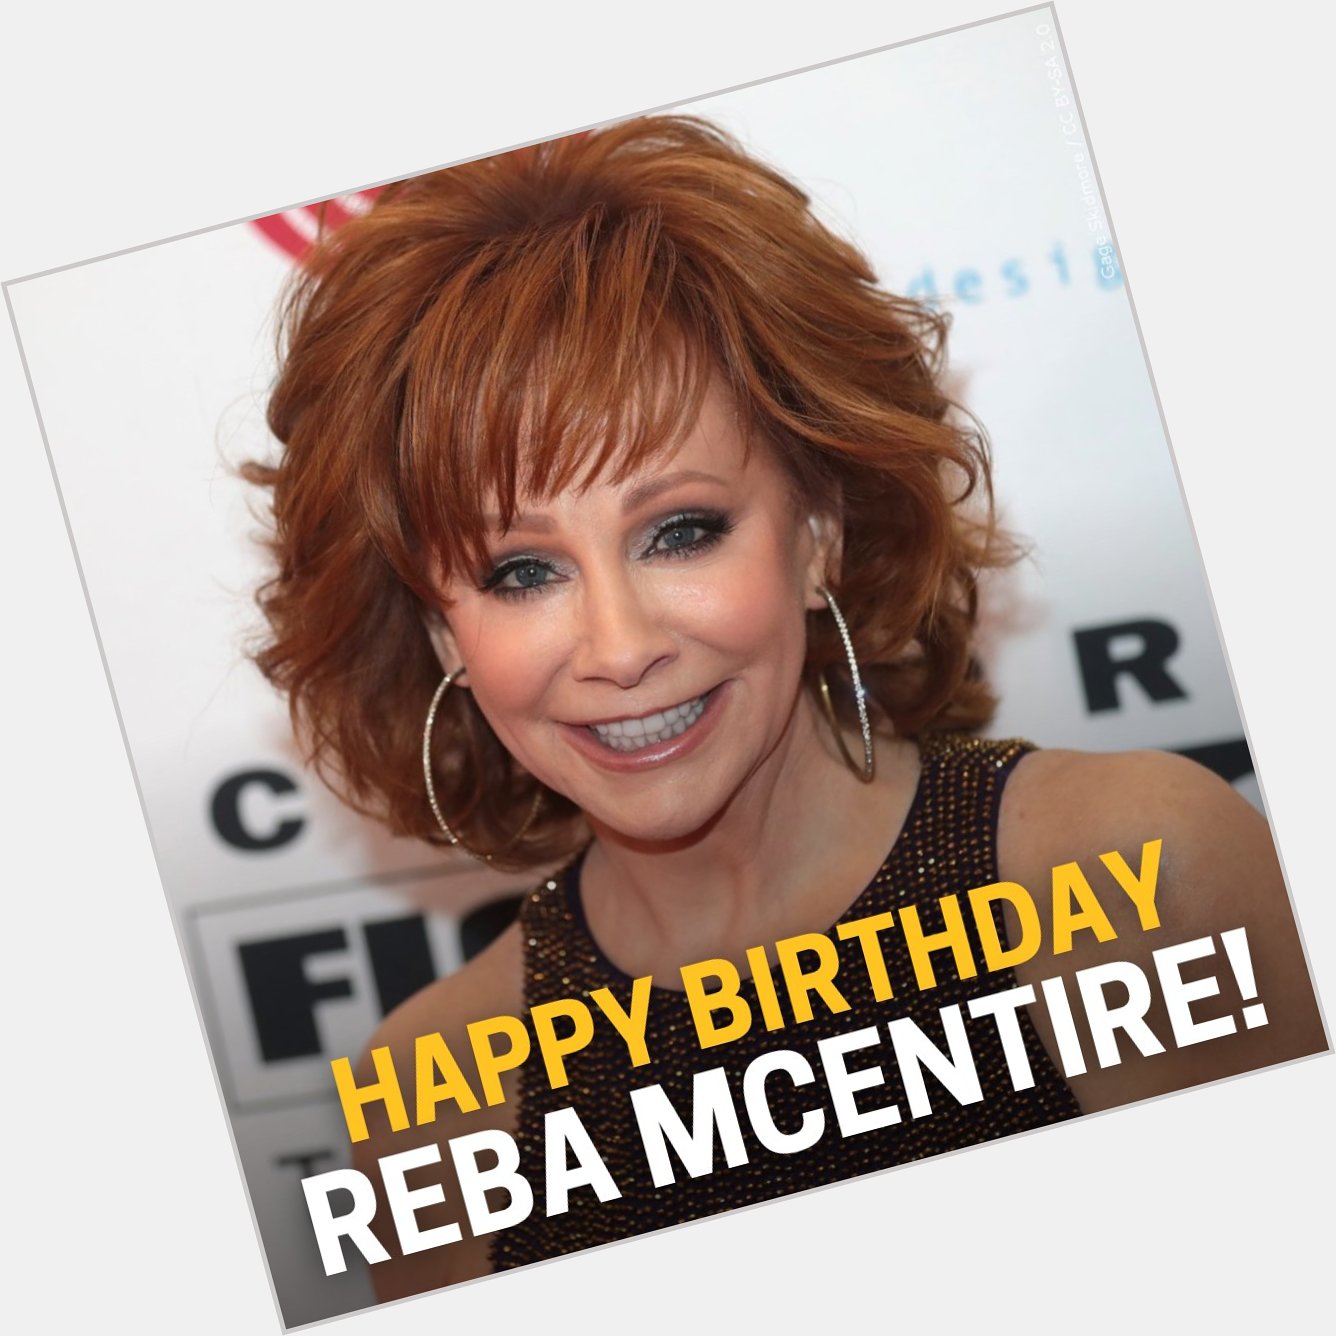 Happy 68th Birthday Reba McEntire! Comment below your favorite Reba song! 